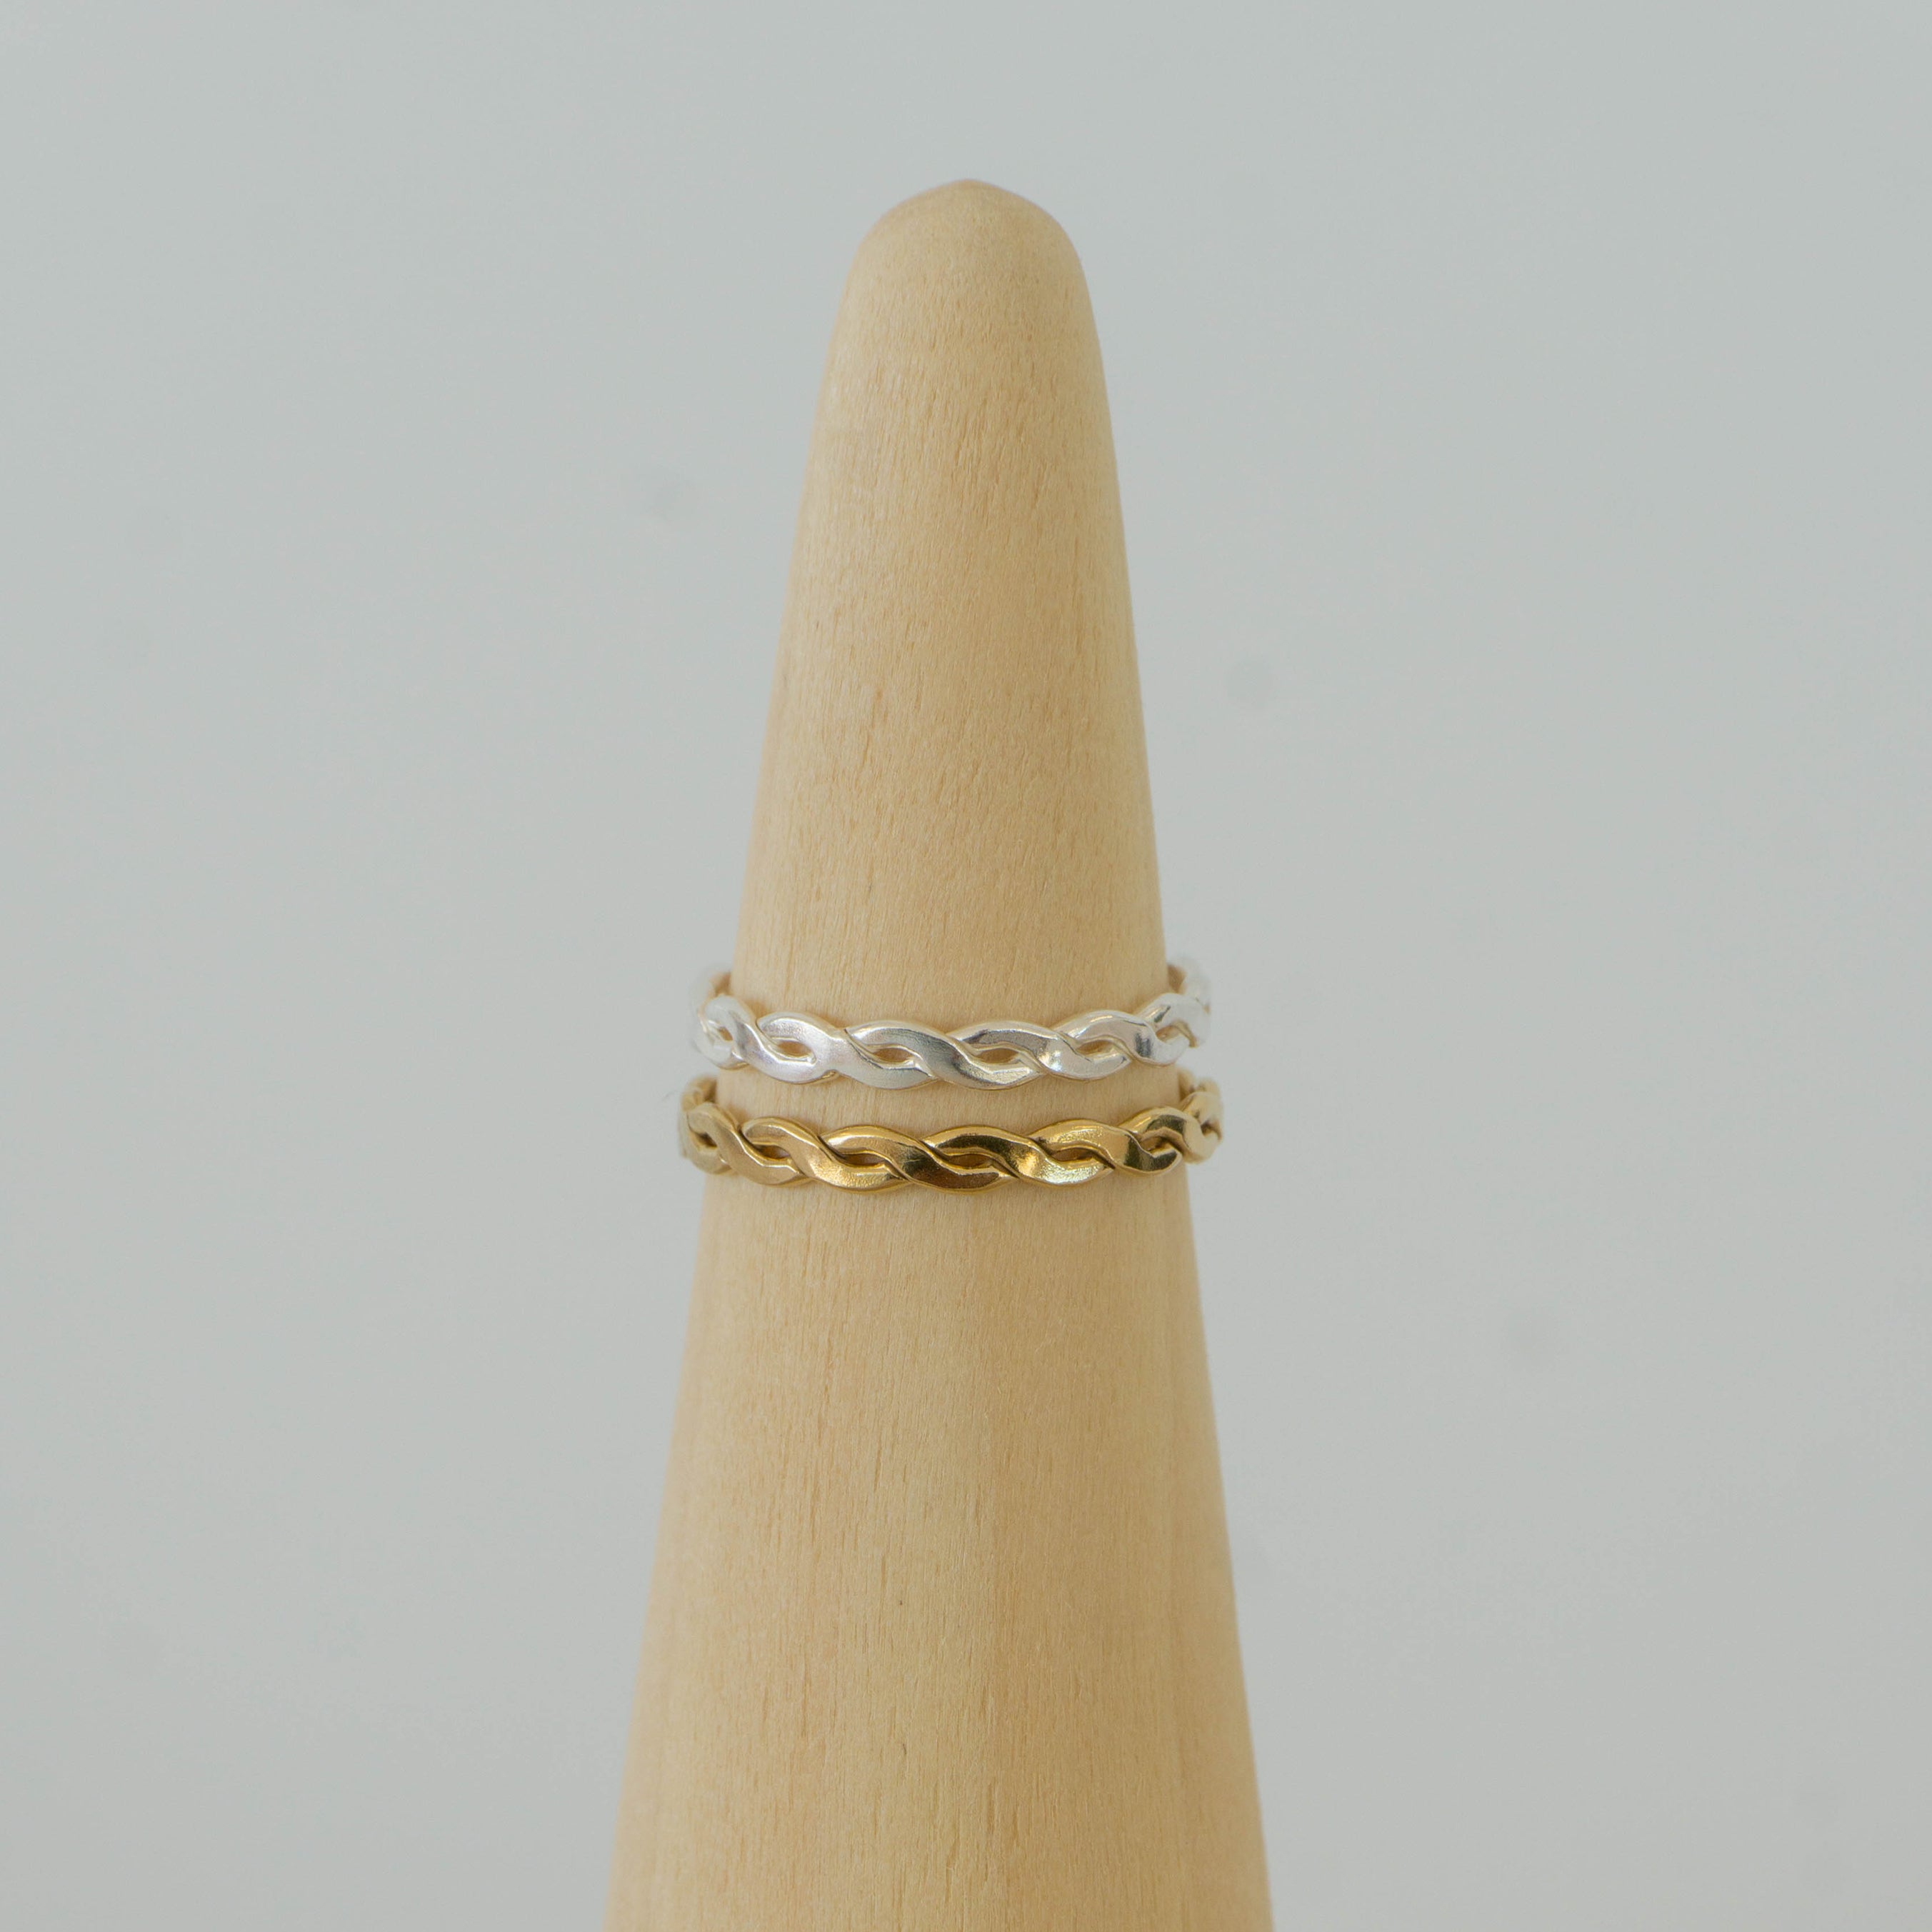 gold filled woven ring / sterling silver woven ring